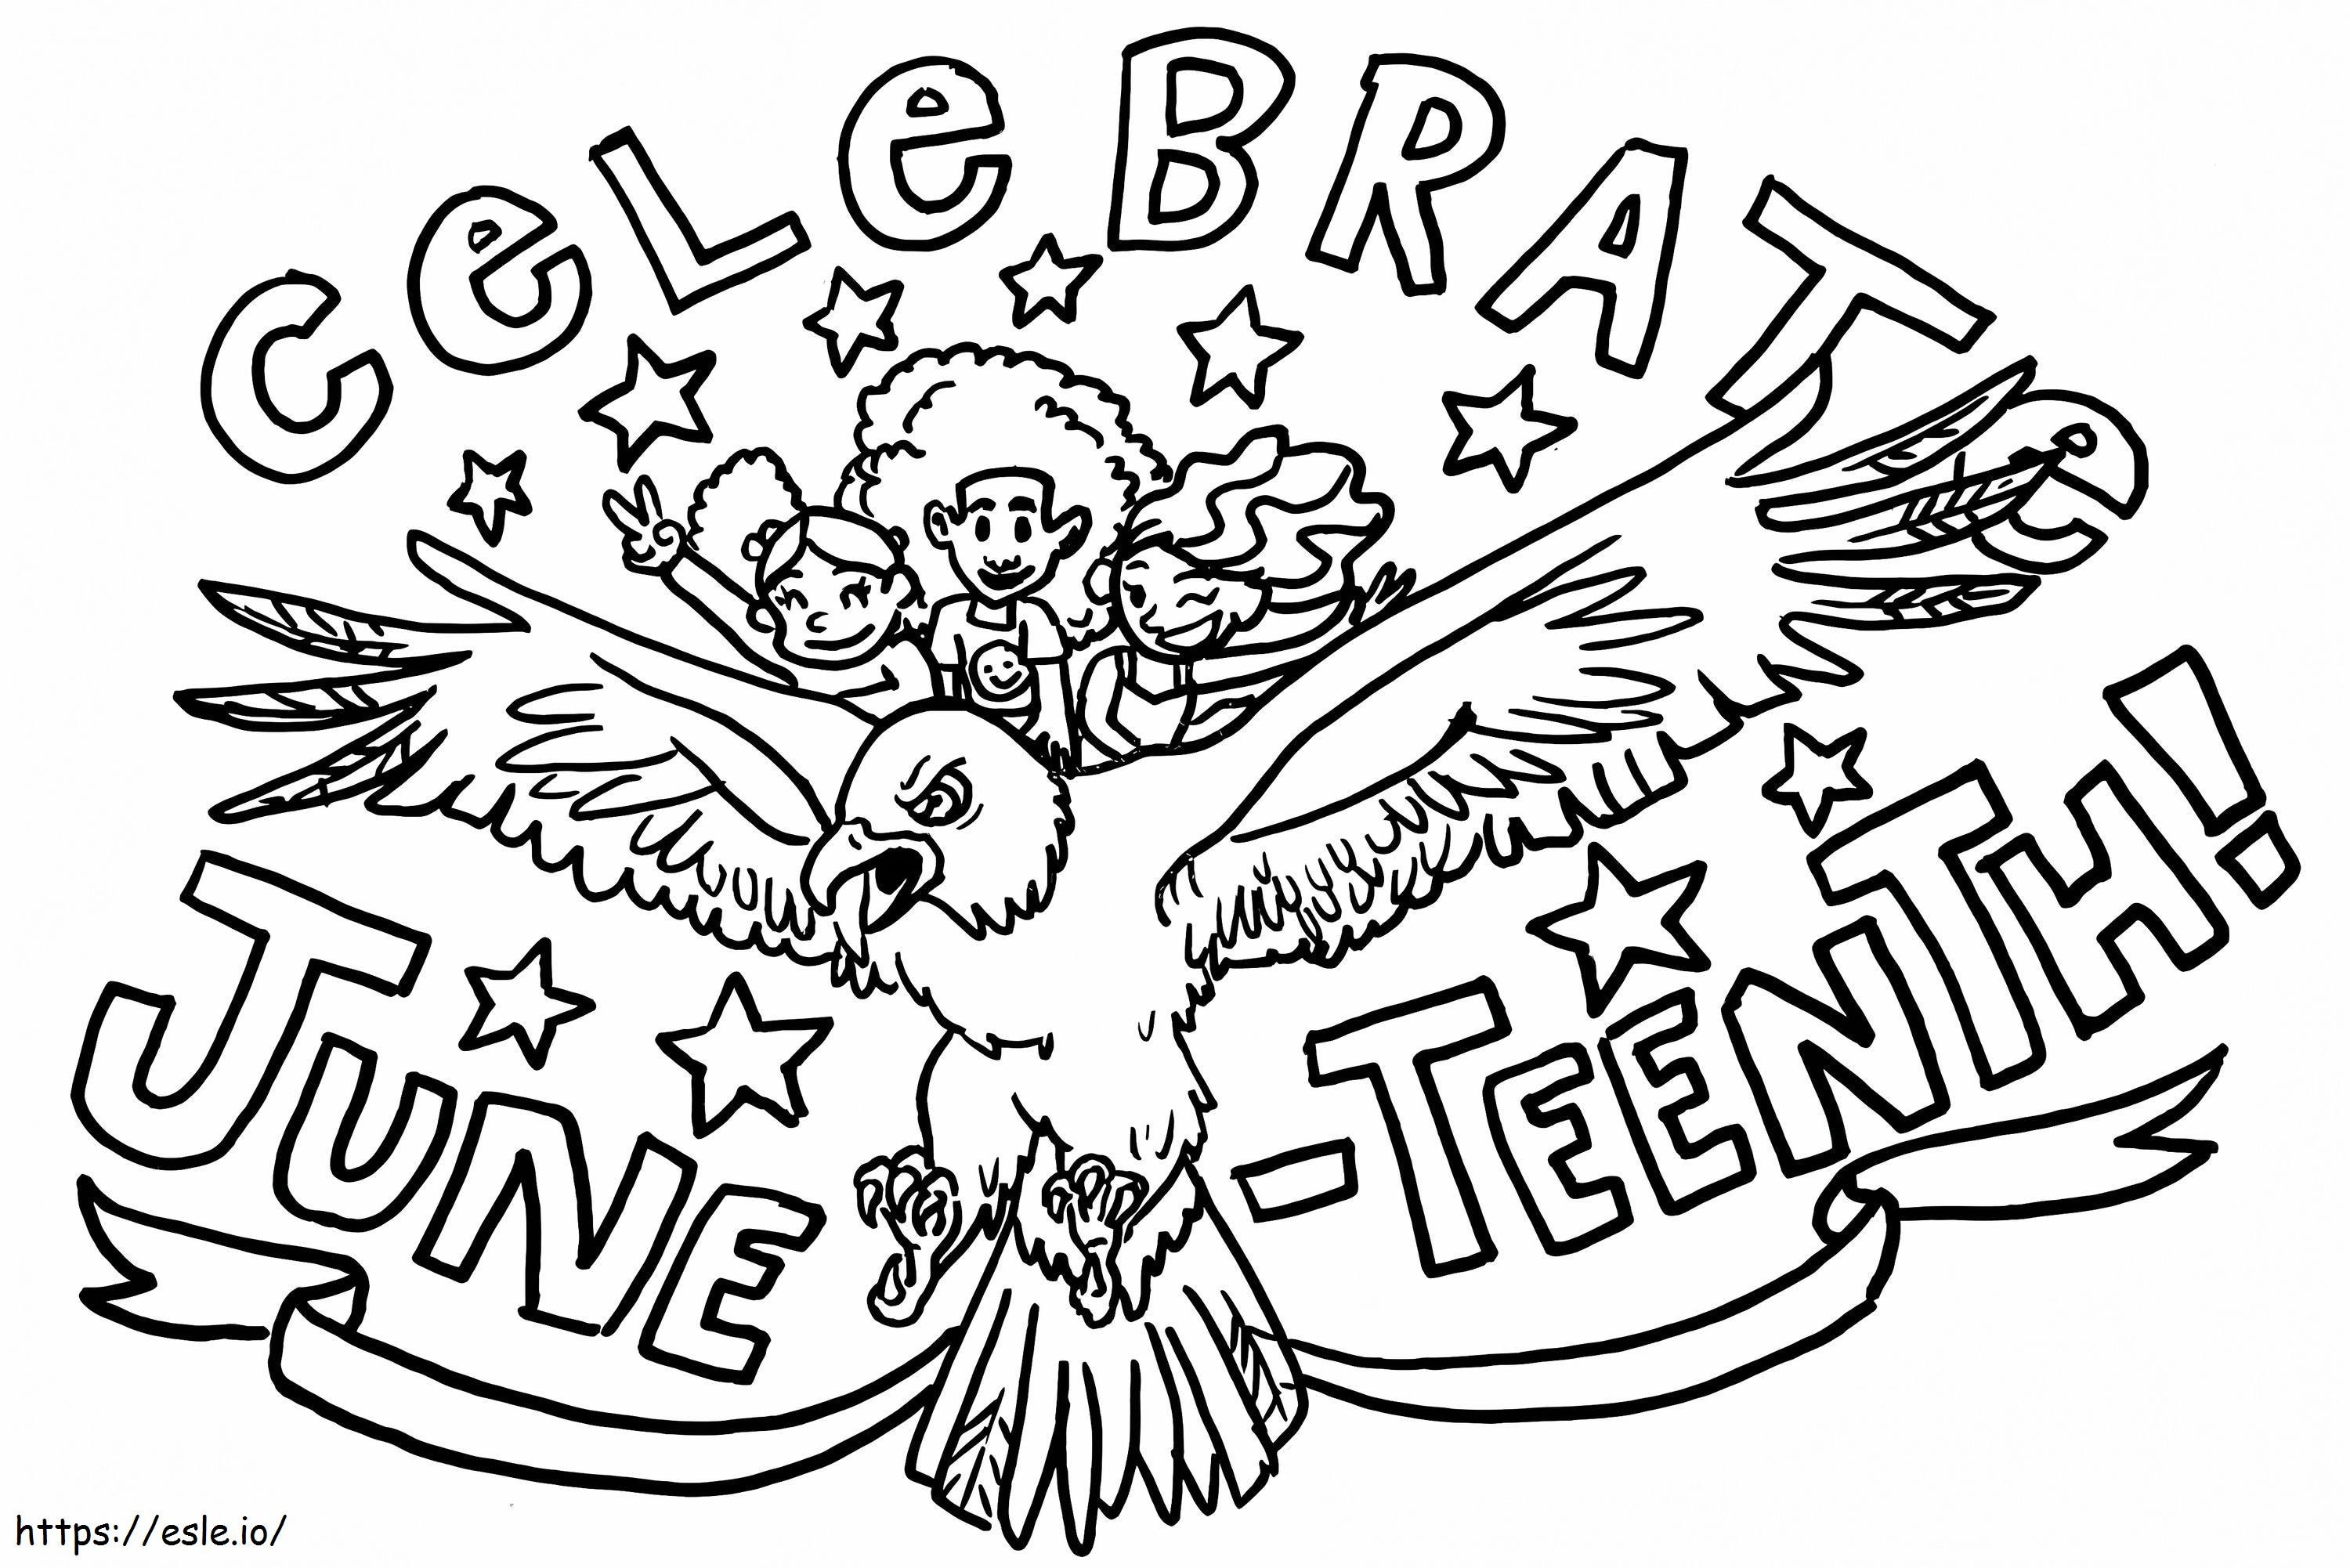 Celebrate Juneteenth coloring page